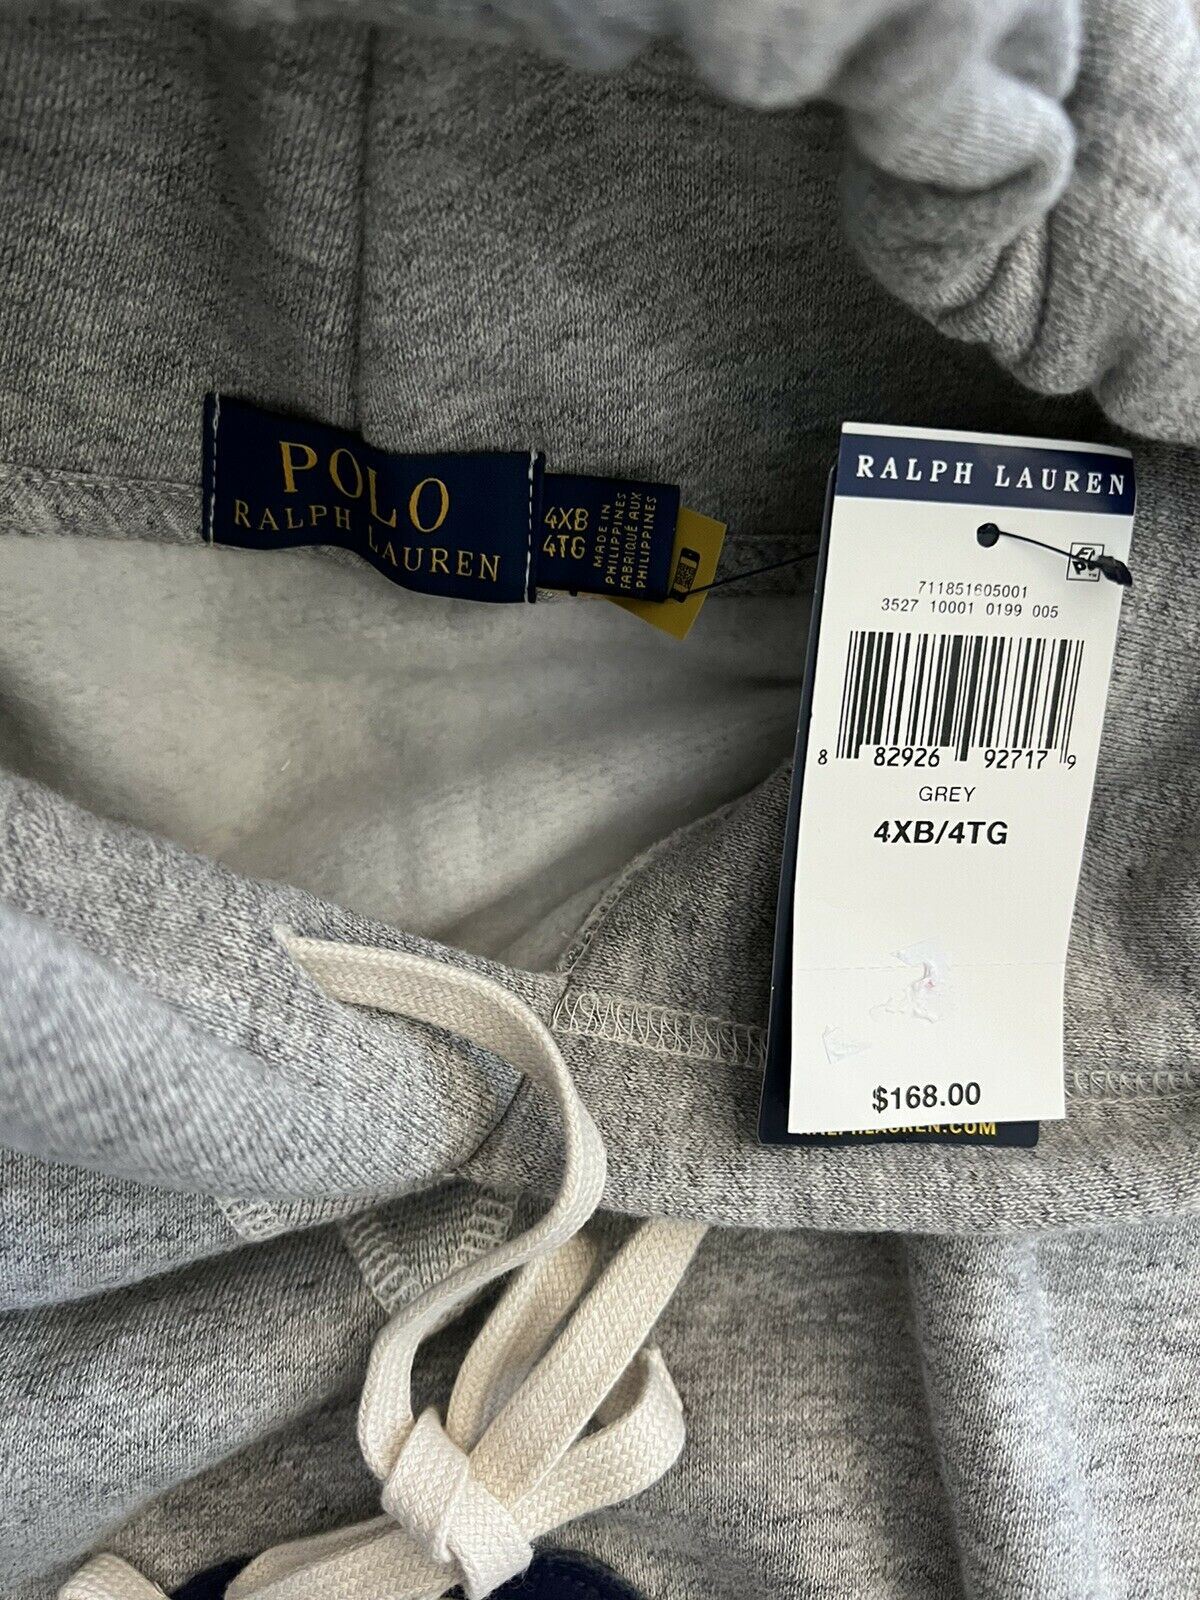 NWT $168 Polo Ralph Lauren Tiger Gray Sweater with Hoodie 4XB